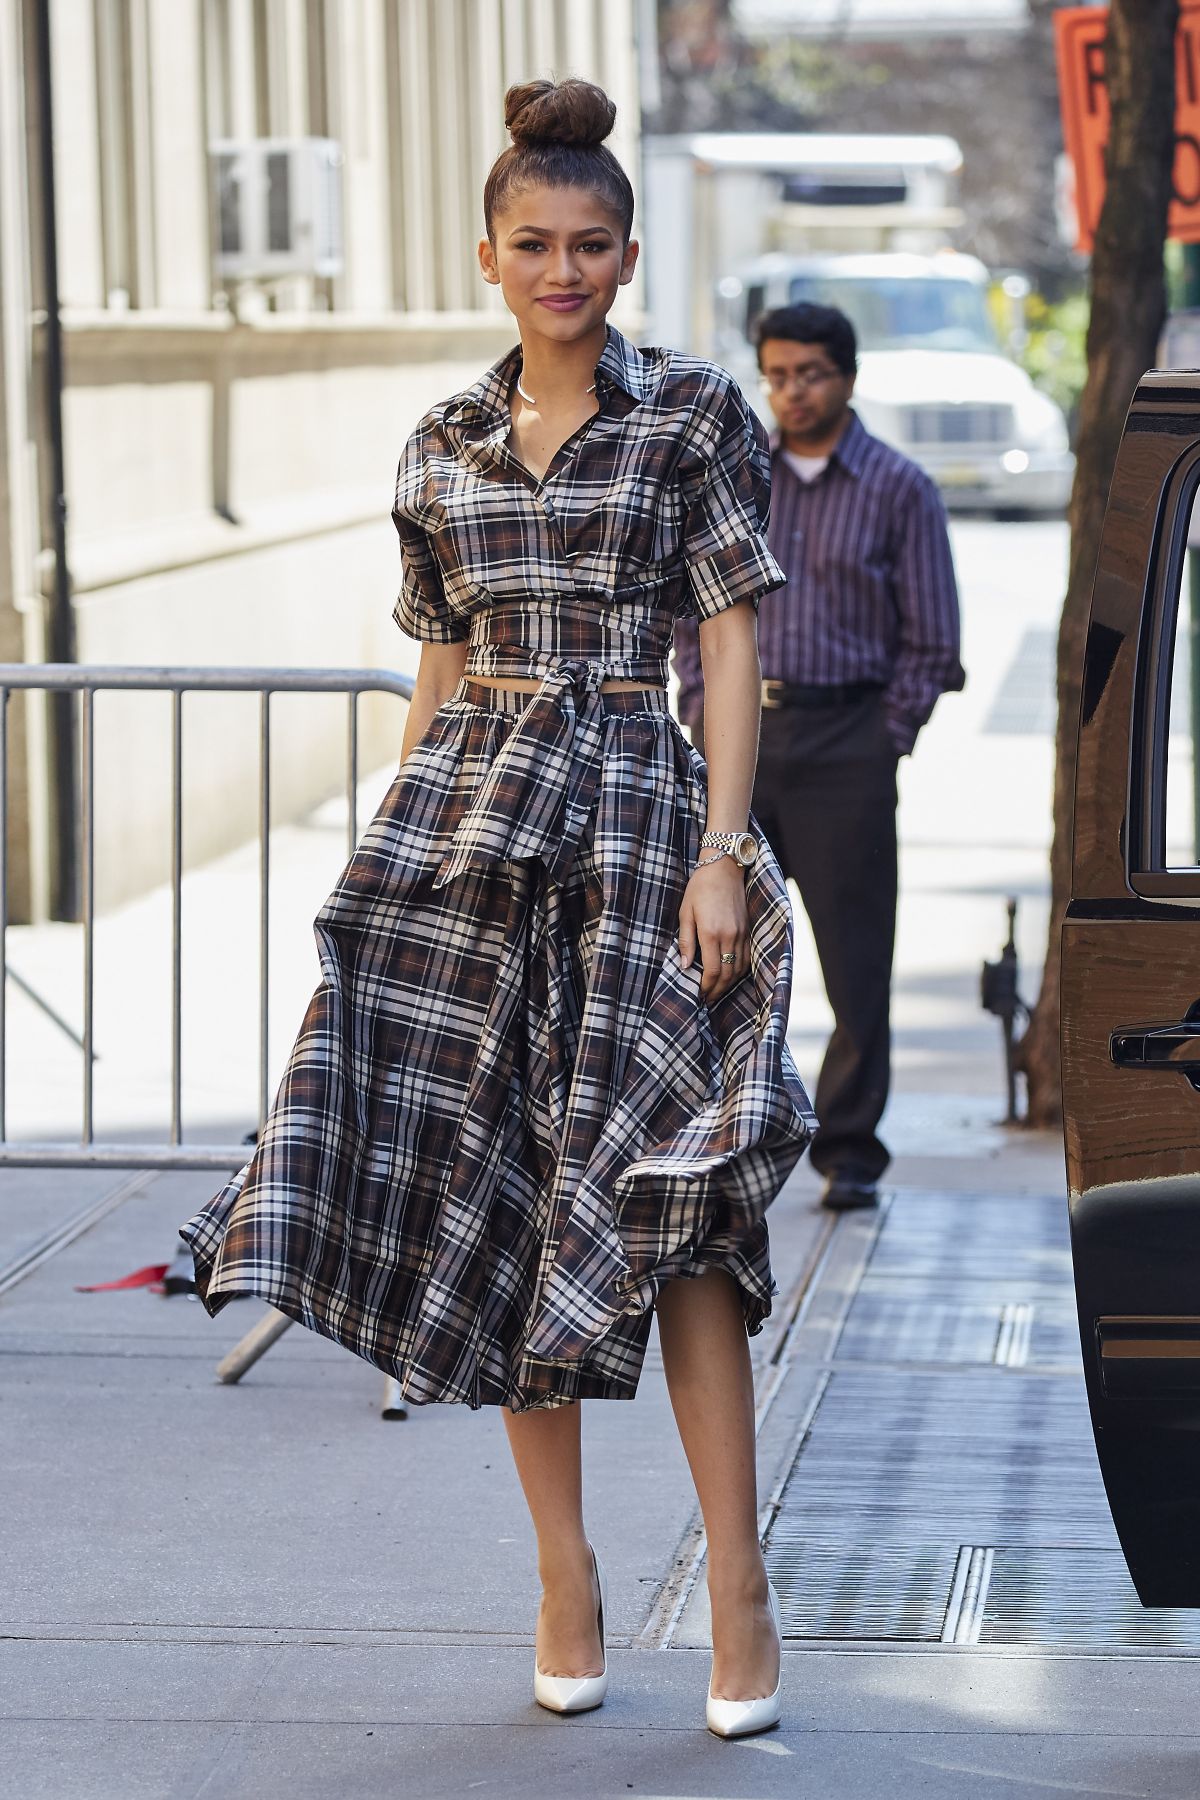 ZENDAYA COLEMAN Arrives at The View in New York 04/22/2015 – HawtCelebs